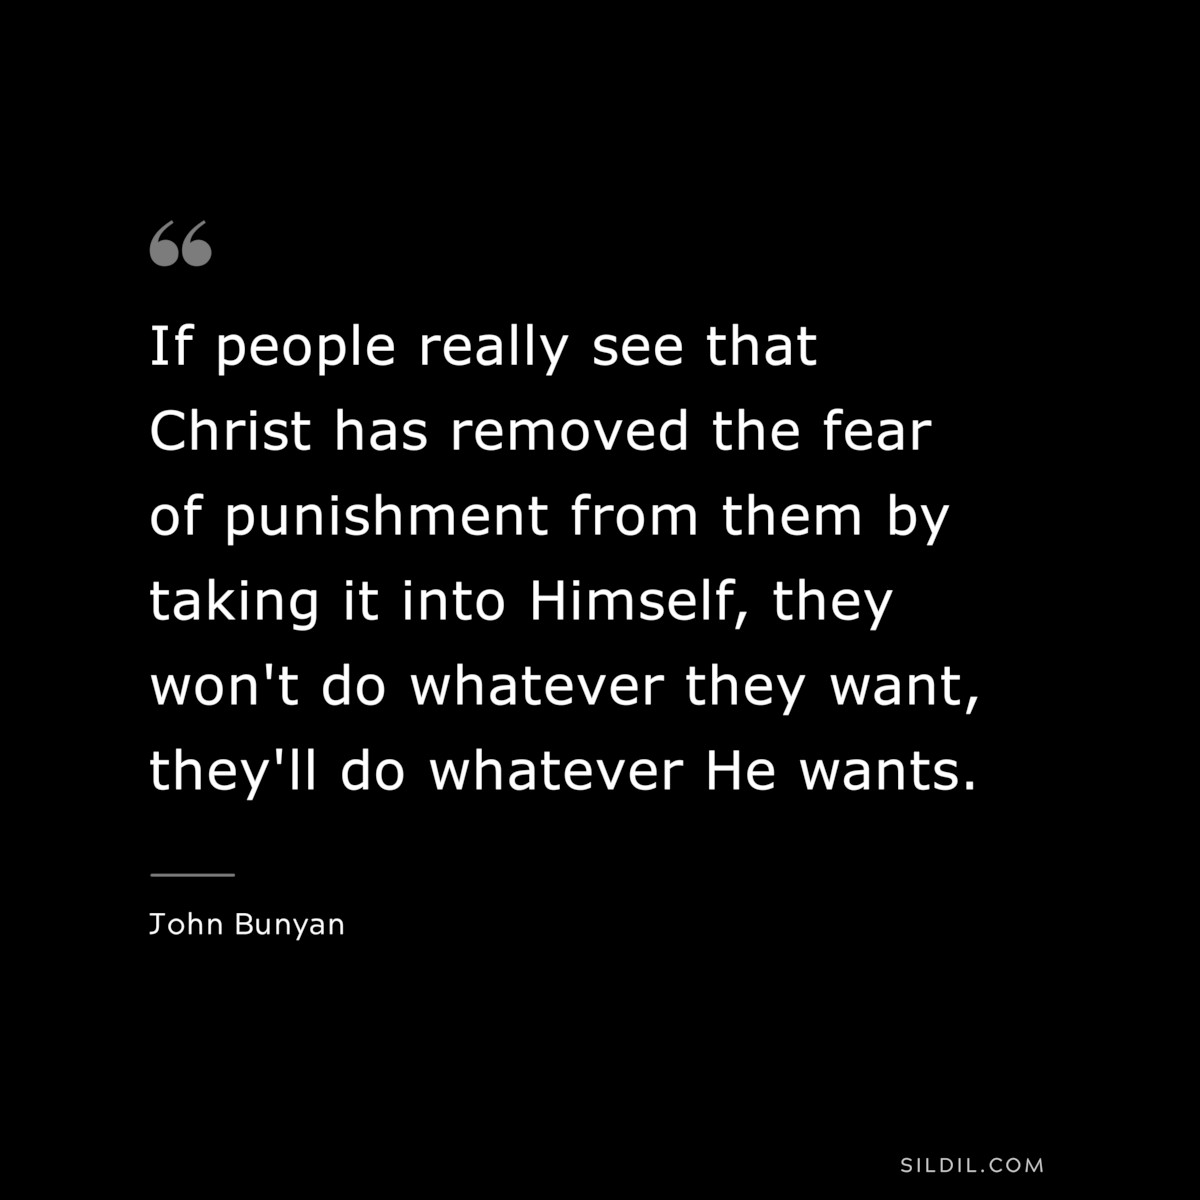 If people really see that Christ has removed the fear of punishment from them by taking it into Himself, they won't do whatever they want, they'll do whatever He wants. ― John Bunyan